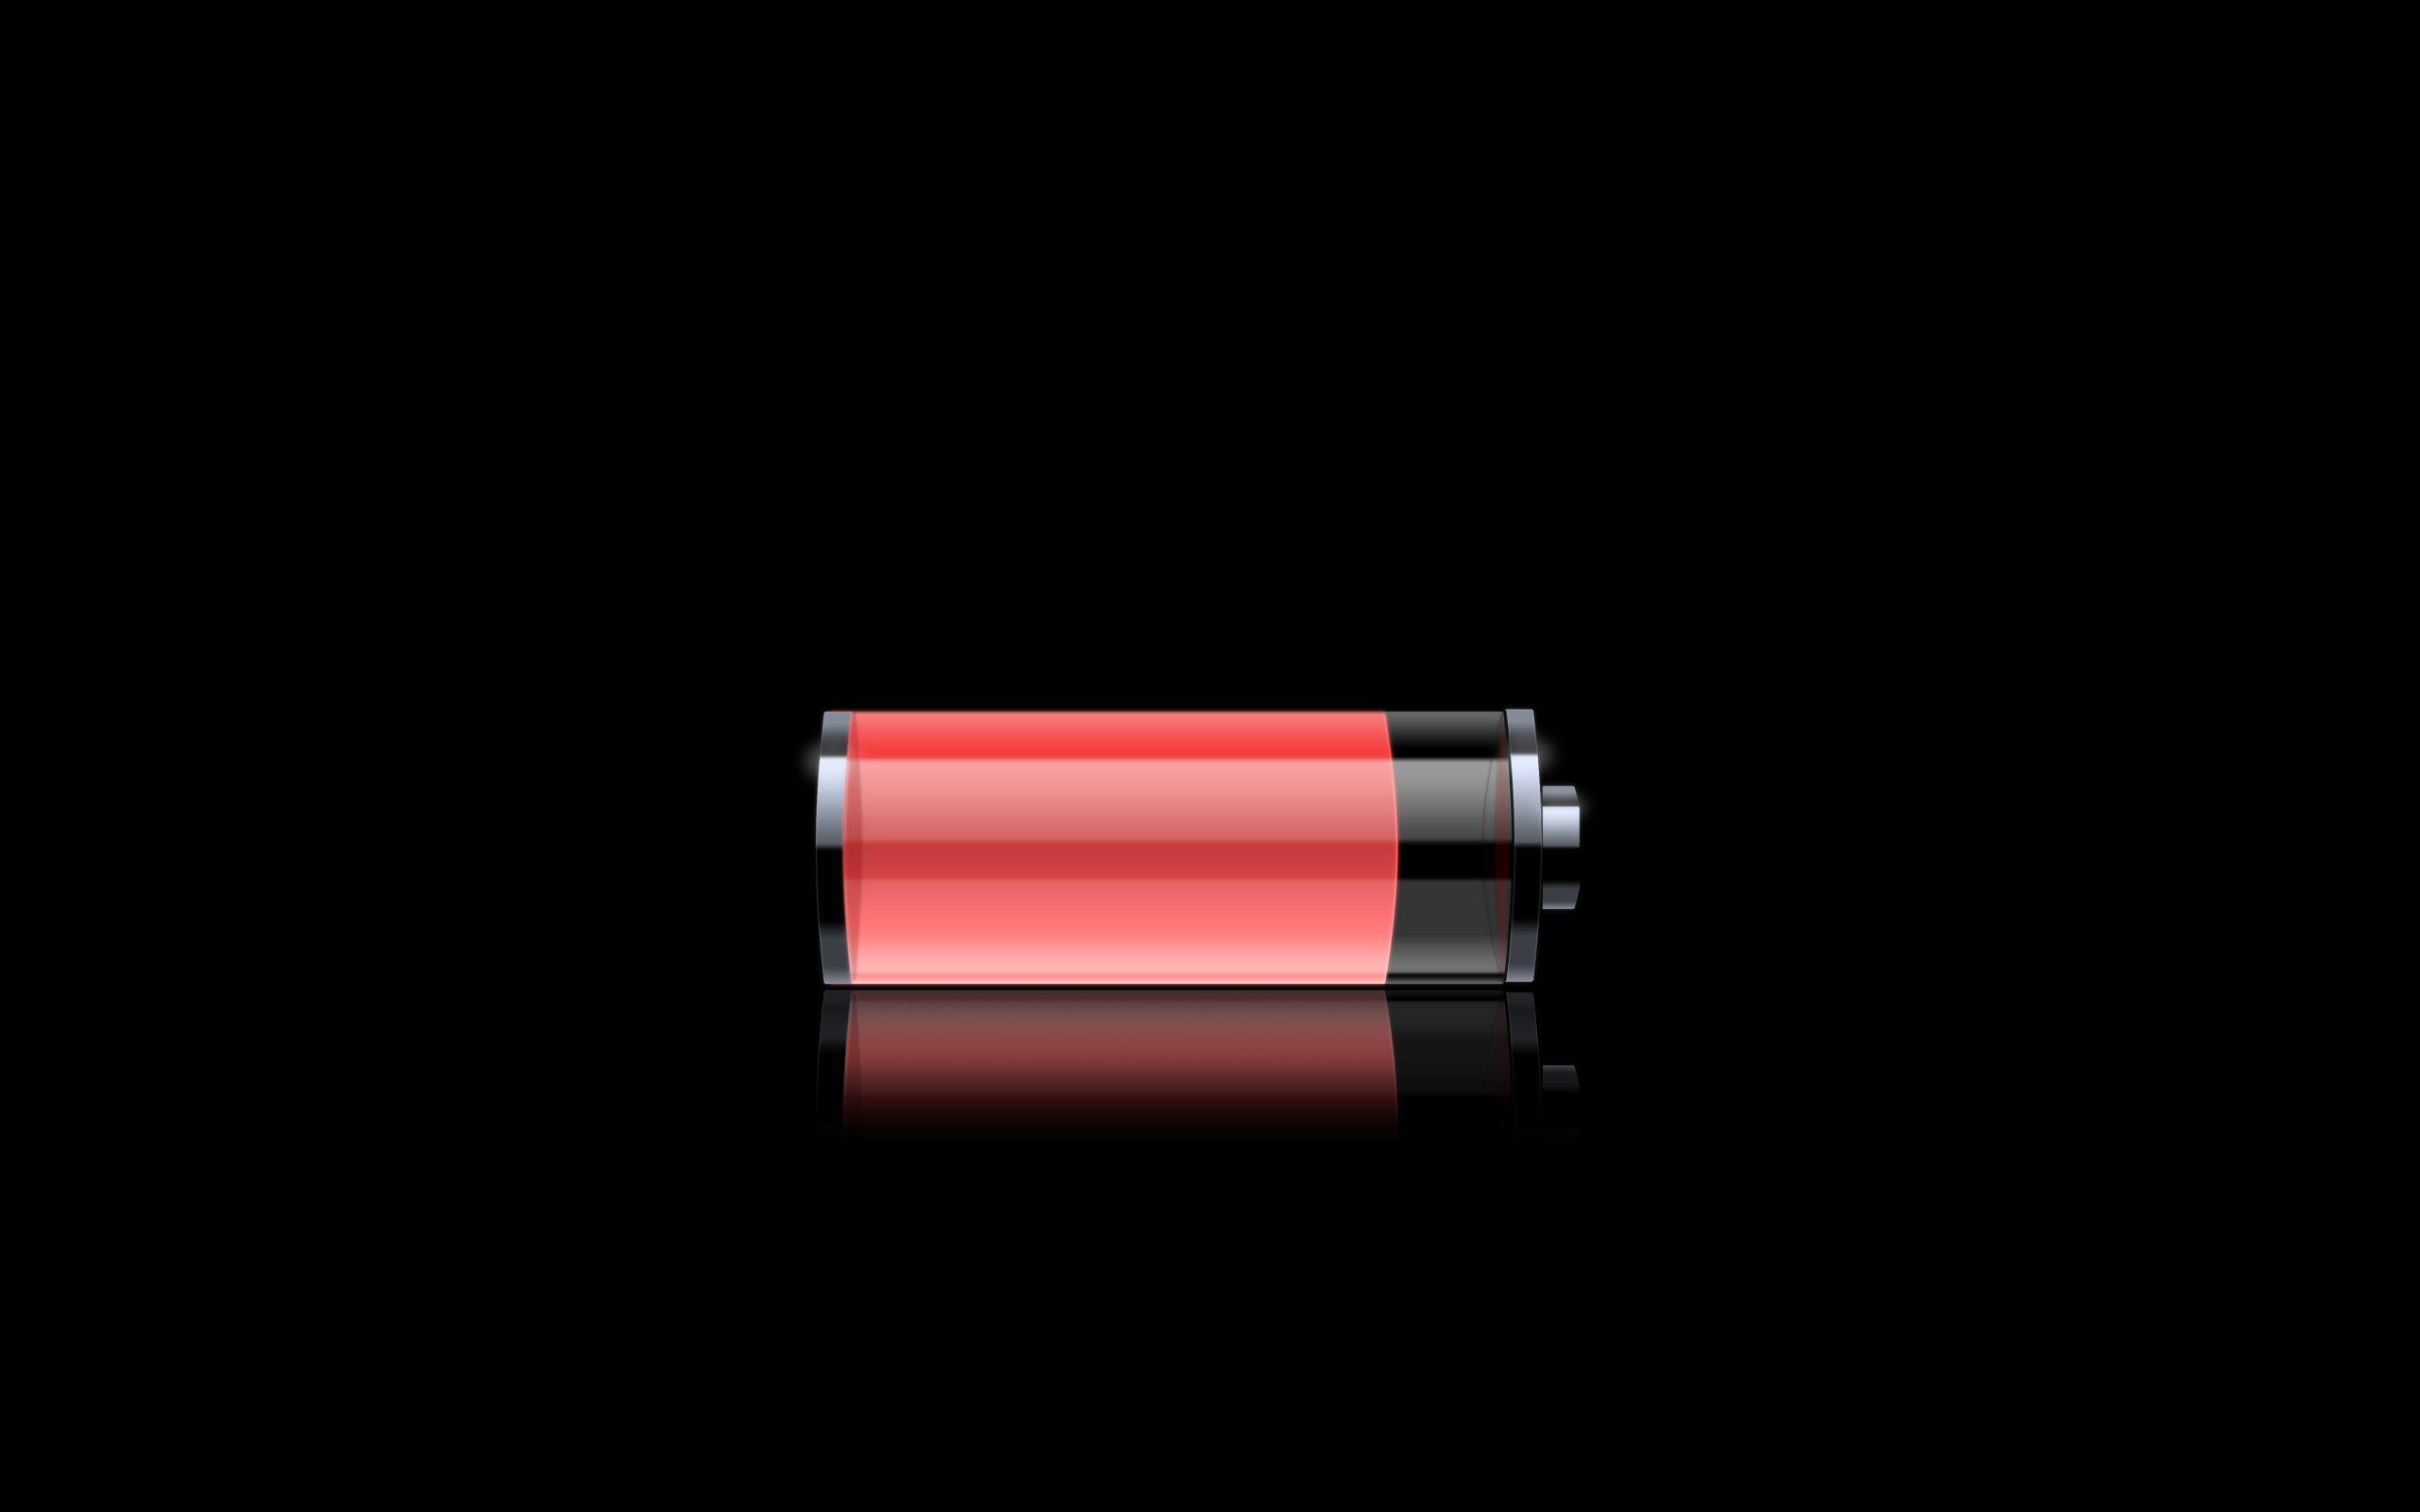 11 Best Battery icon ideas | iphone wallpaper, battery icon, aesthetic  iphone wallpaper